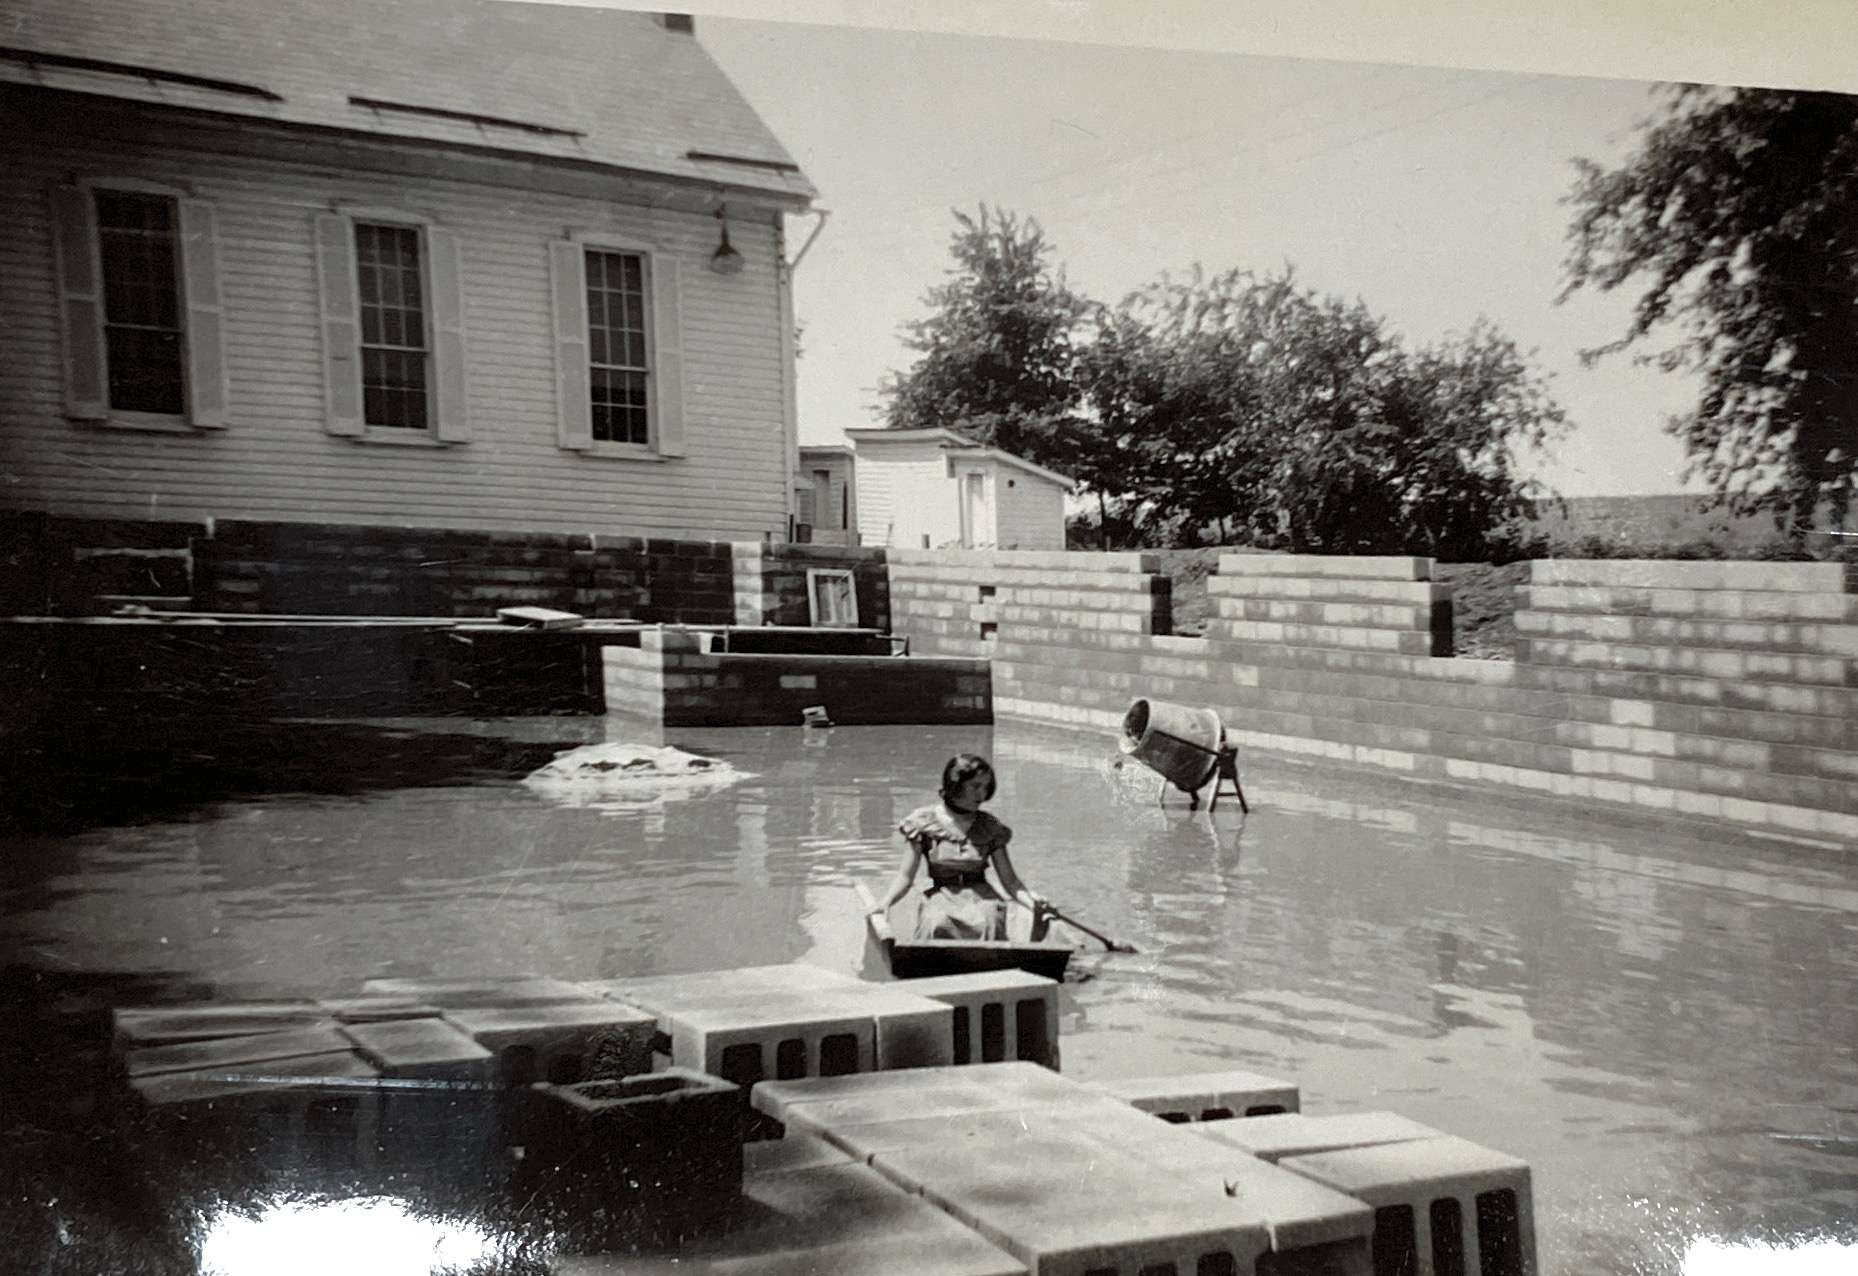 Pat Berger floating in a mortar box. This in inside the excavated area that would become the basement in the Hollowell Church addition in 1954 (photo provided by Howard Bingaman)